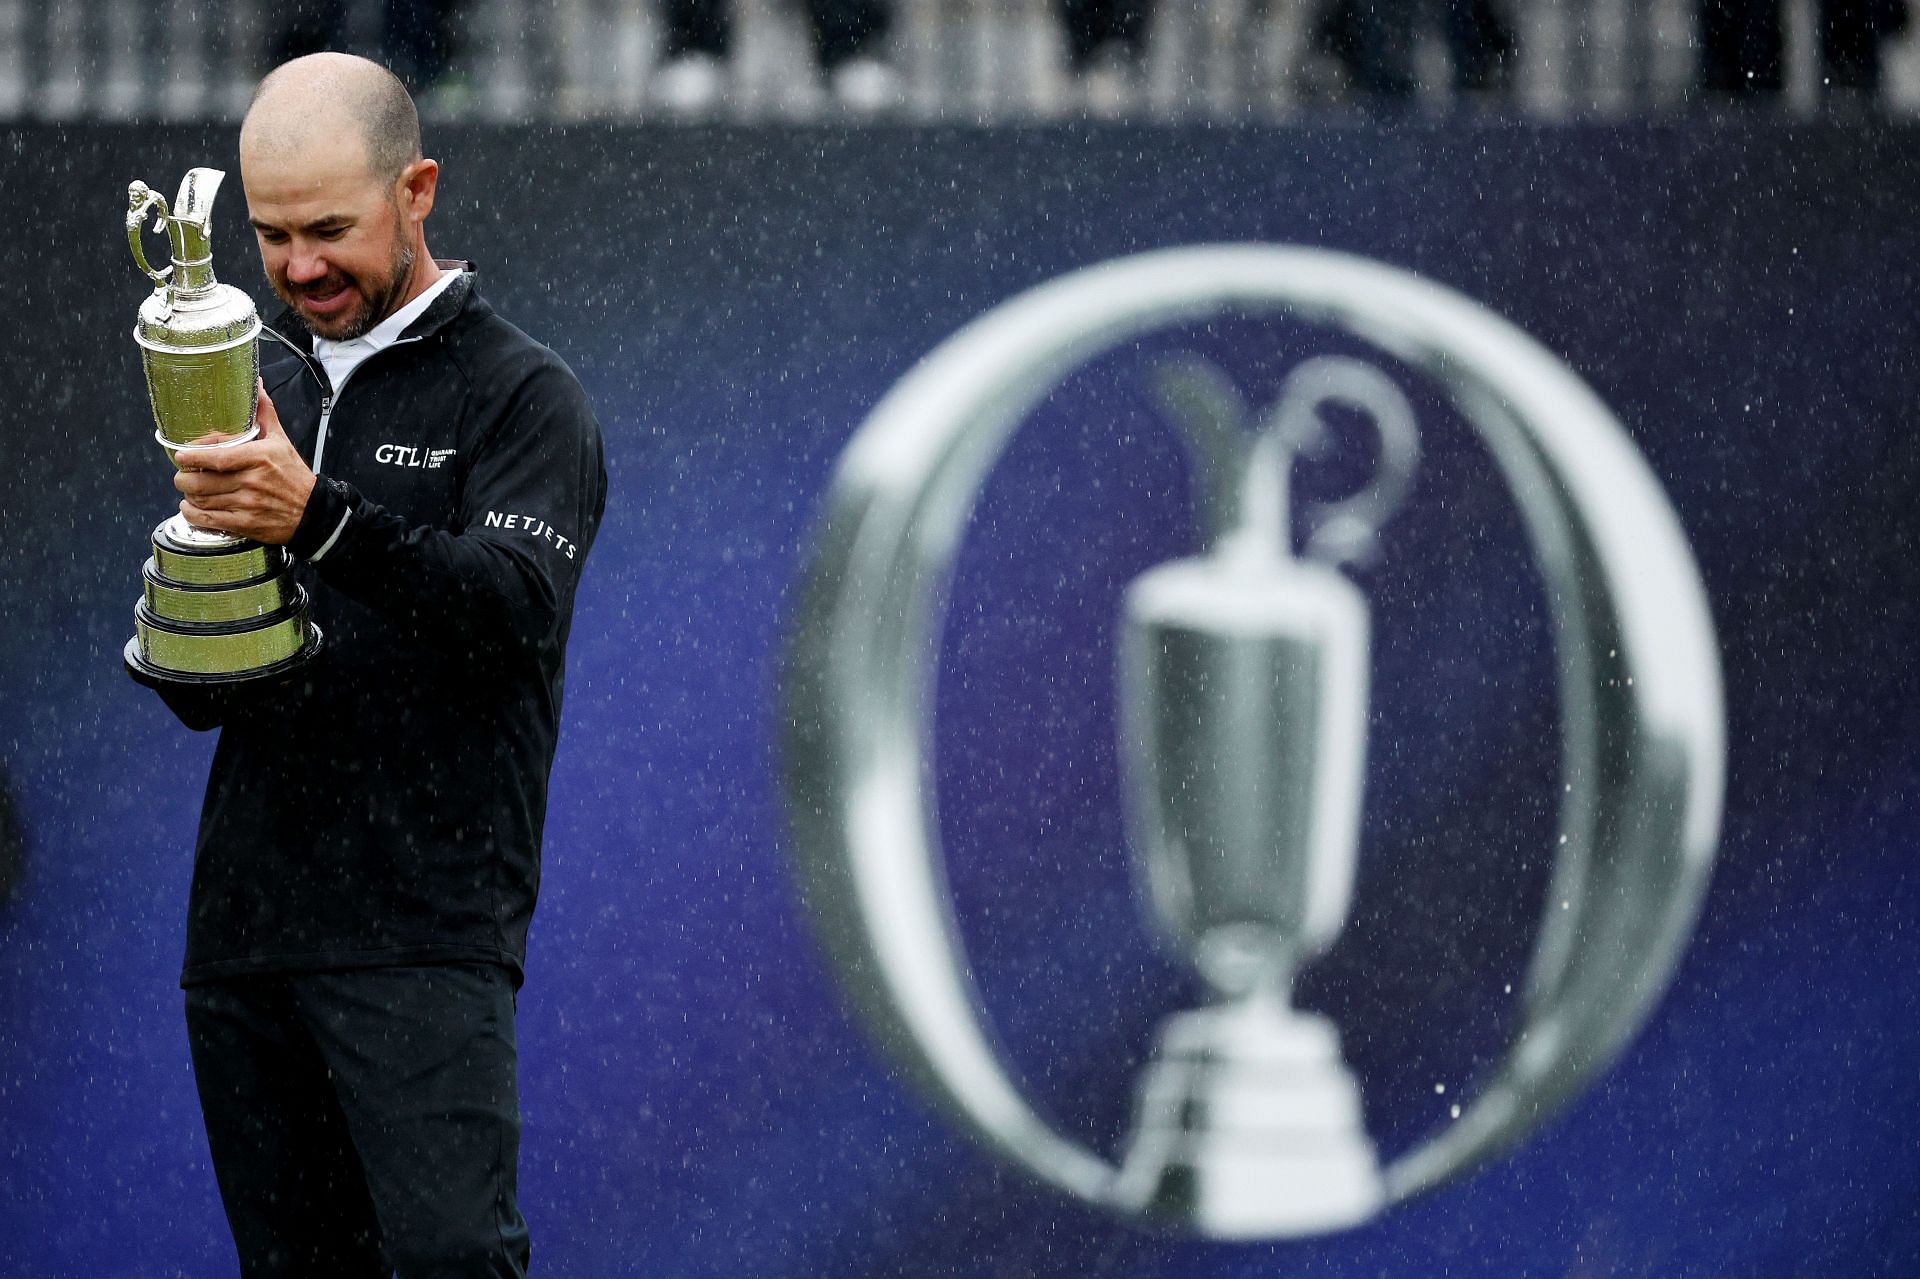 Brian Harman admires the Claret Jug after winning the 151st Open